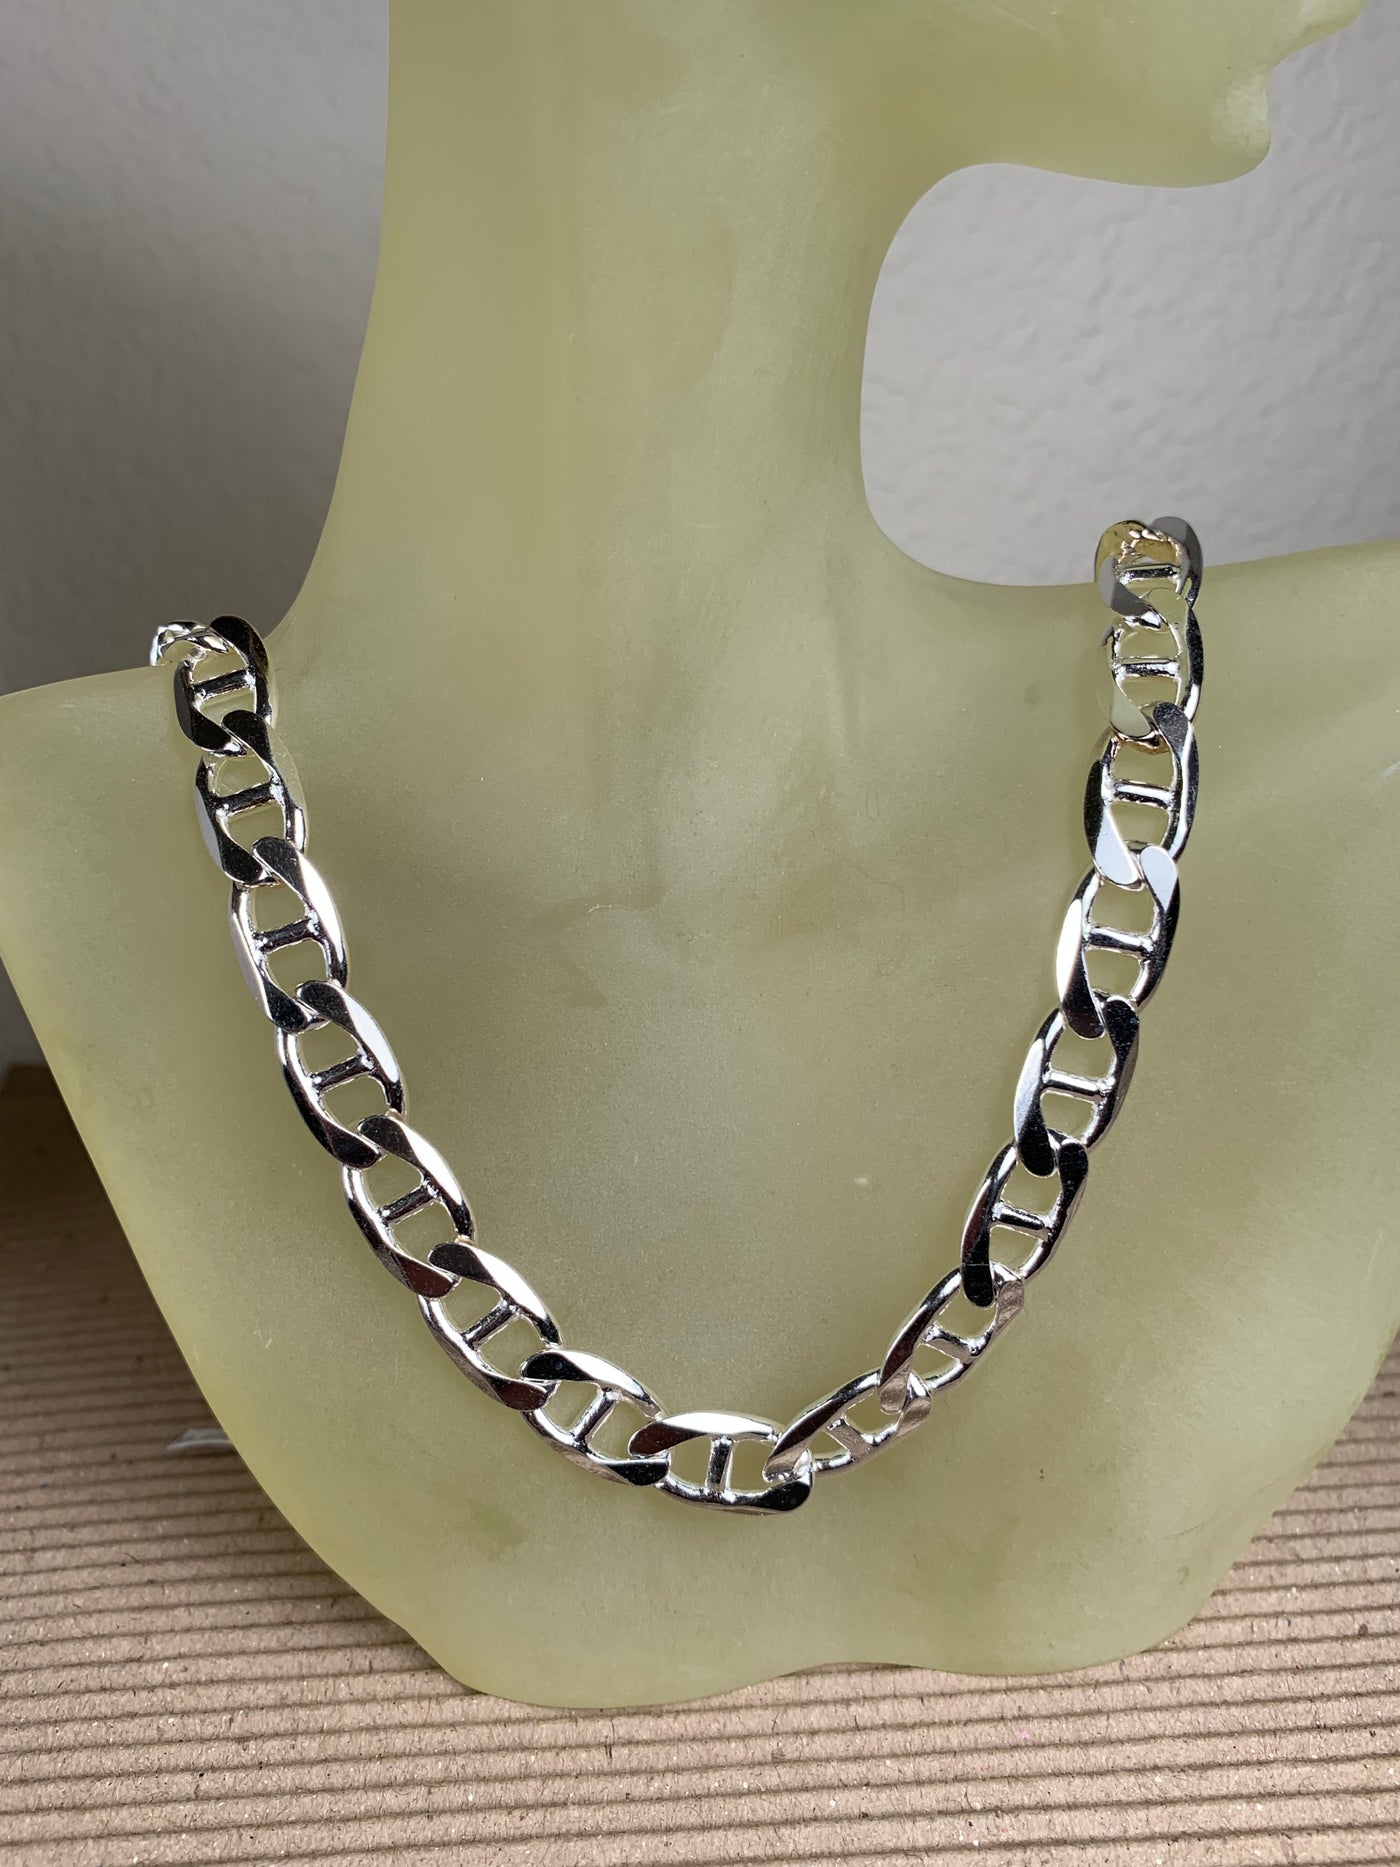 10mm Italian Sterling Silver Mariner Chain Necklace